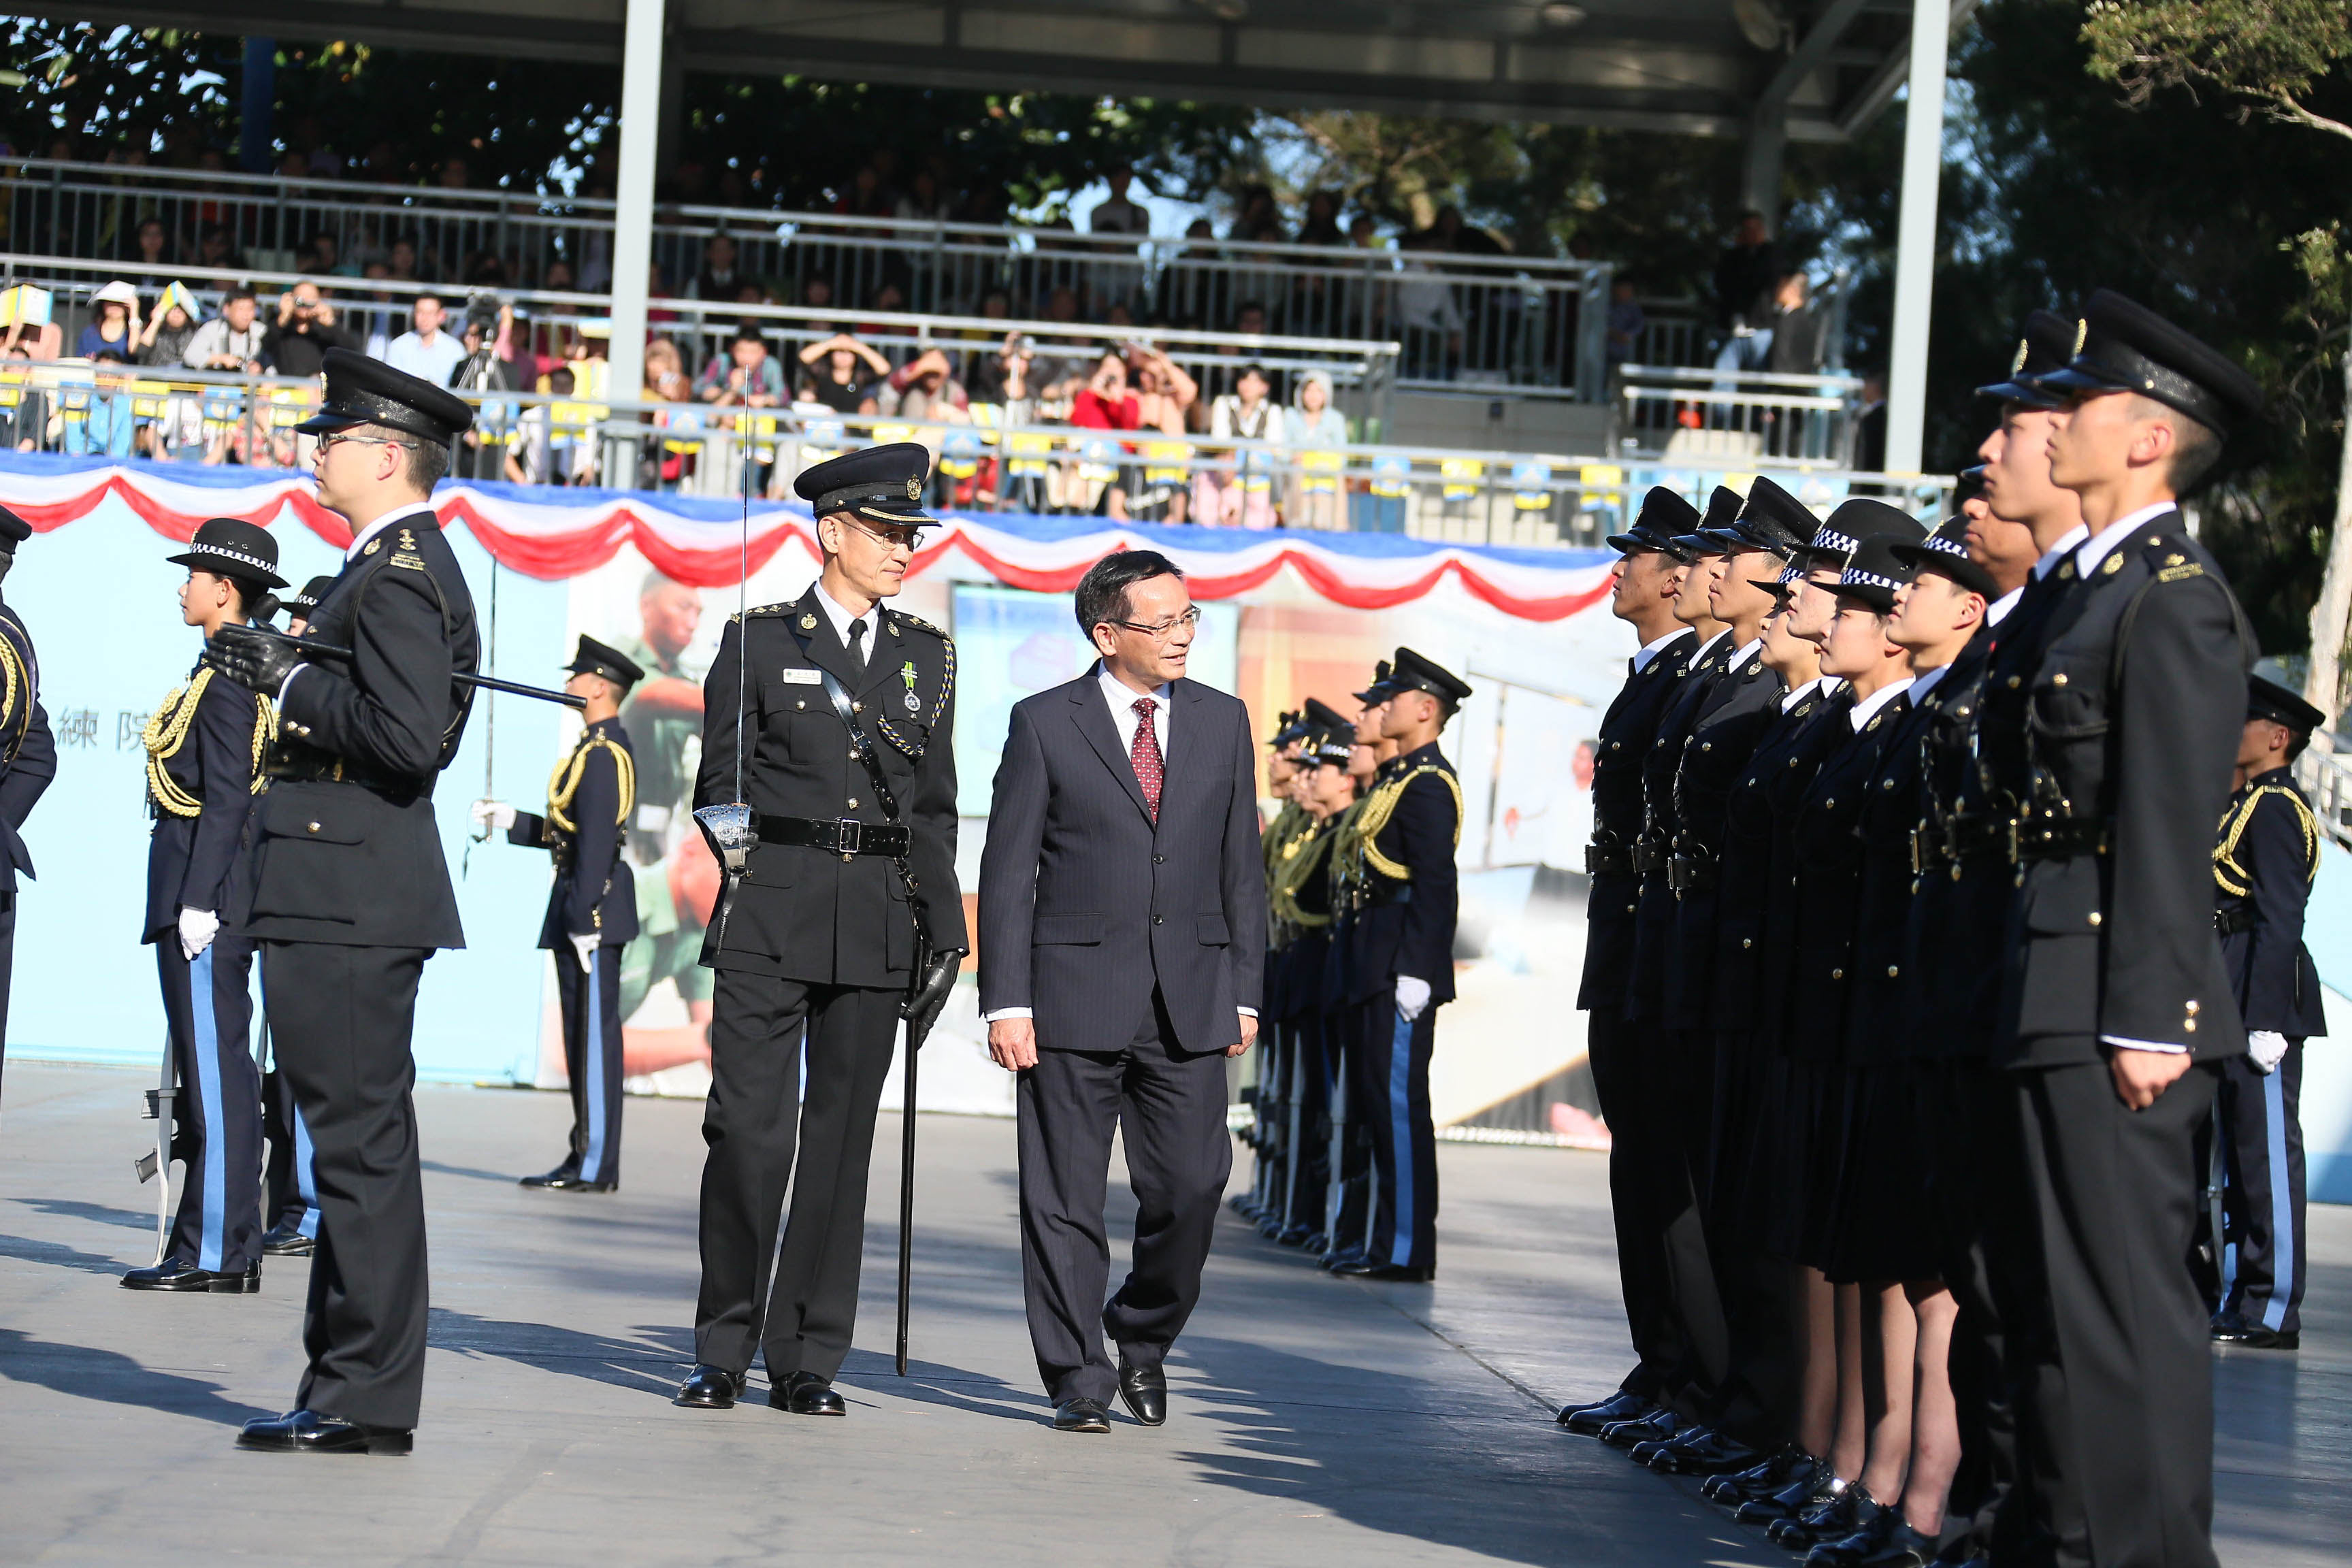 The Chairman of the Legislative Council Panel on Security, Mr Ip Kwok-him, inspects a contingent of correctional officers at the passing-out parade today (February 1). 